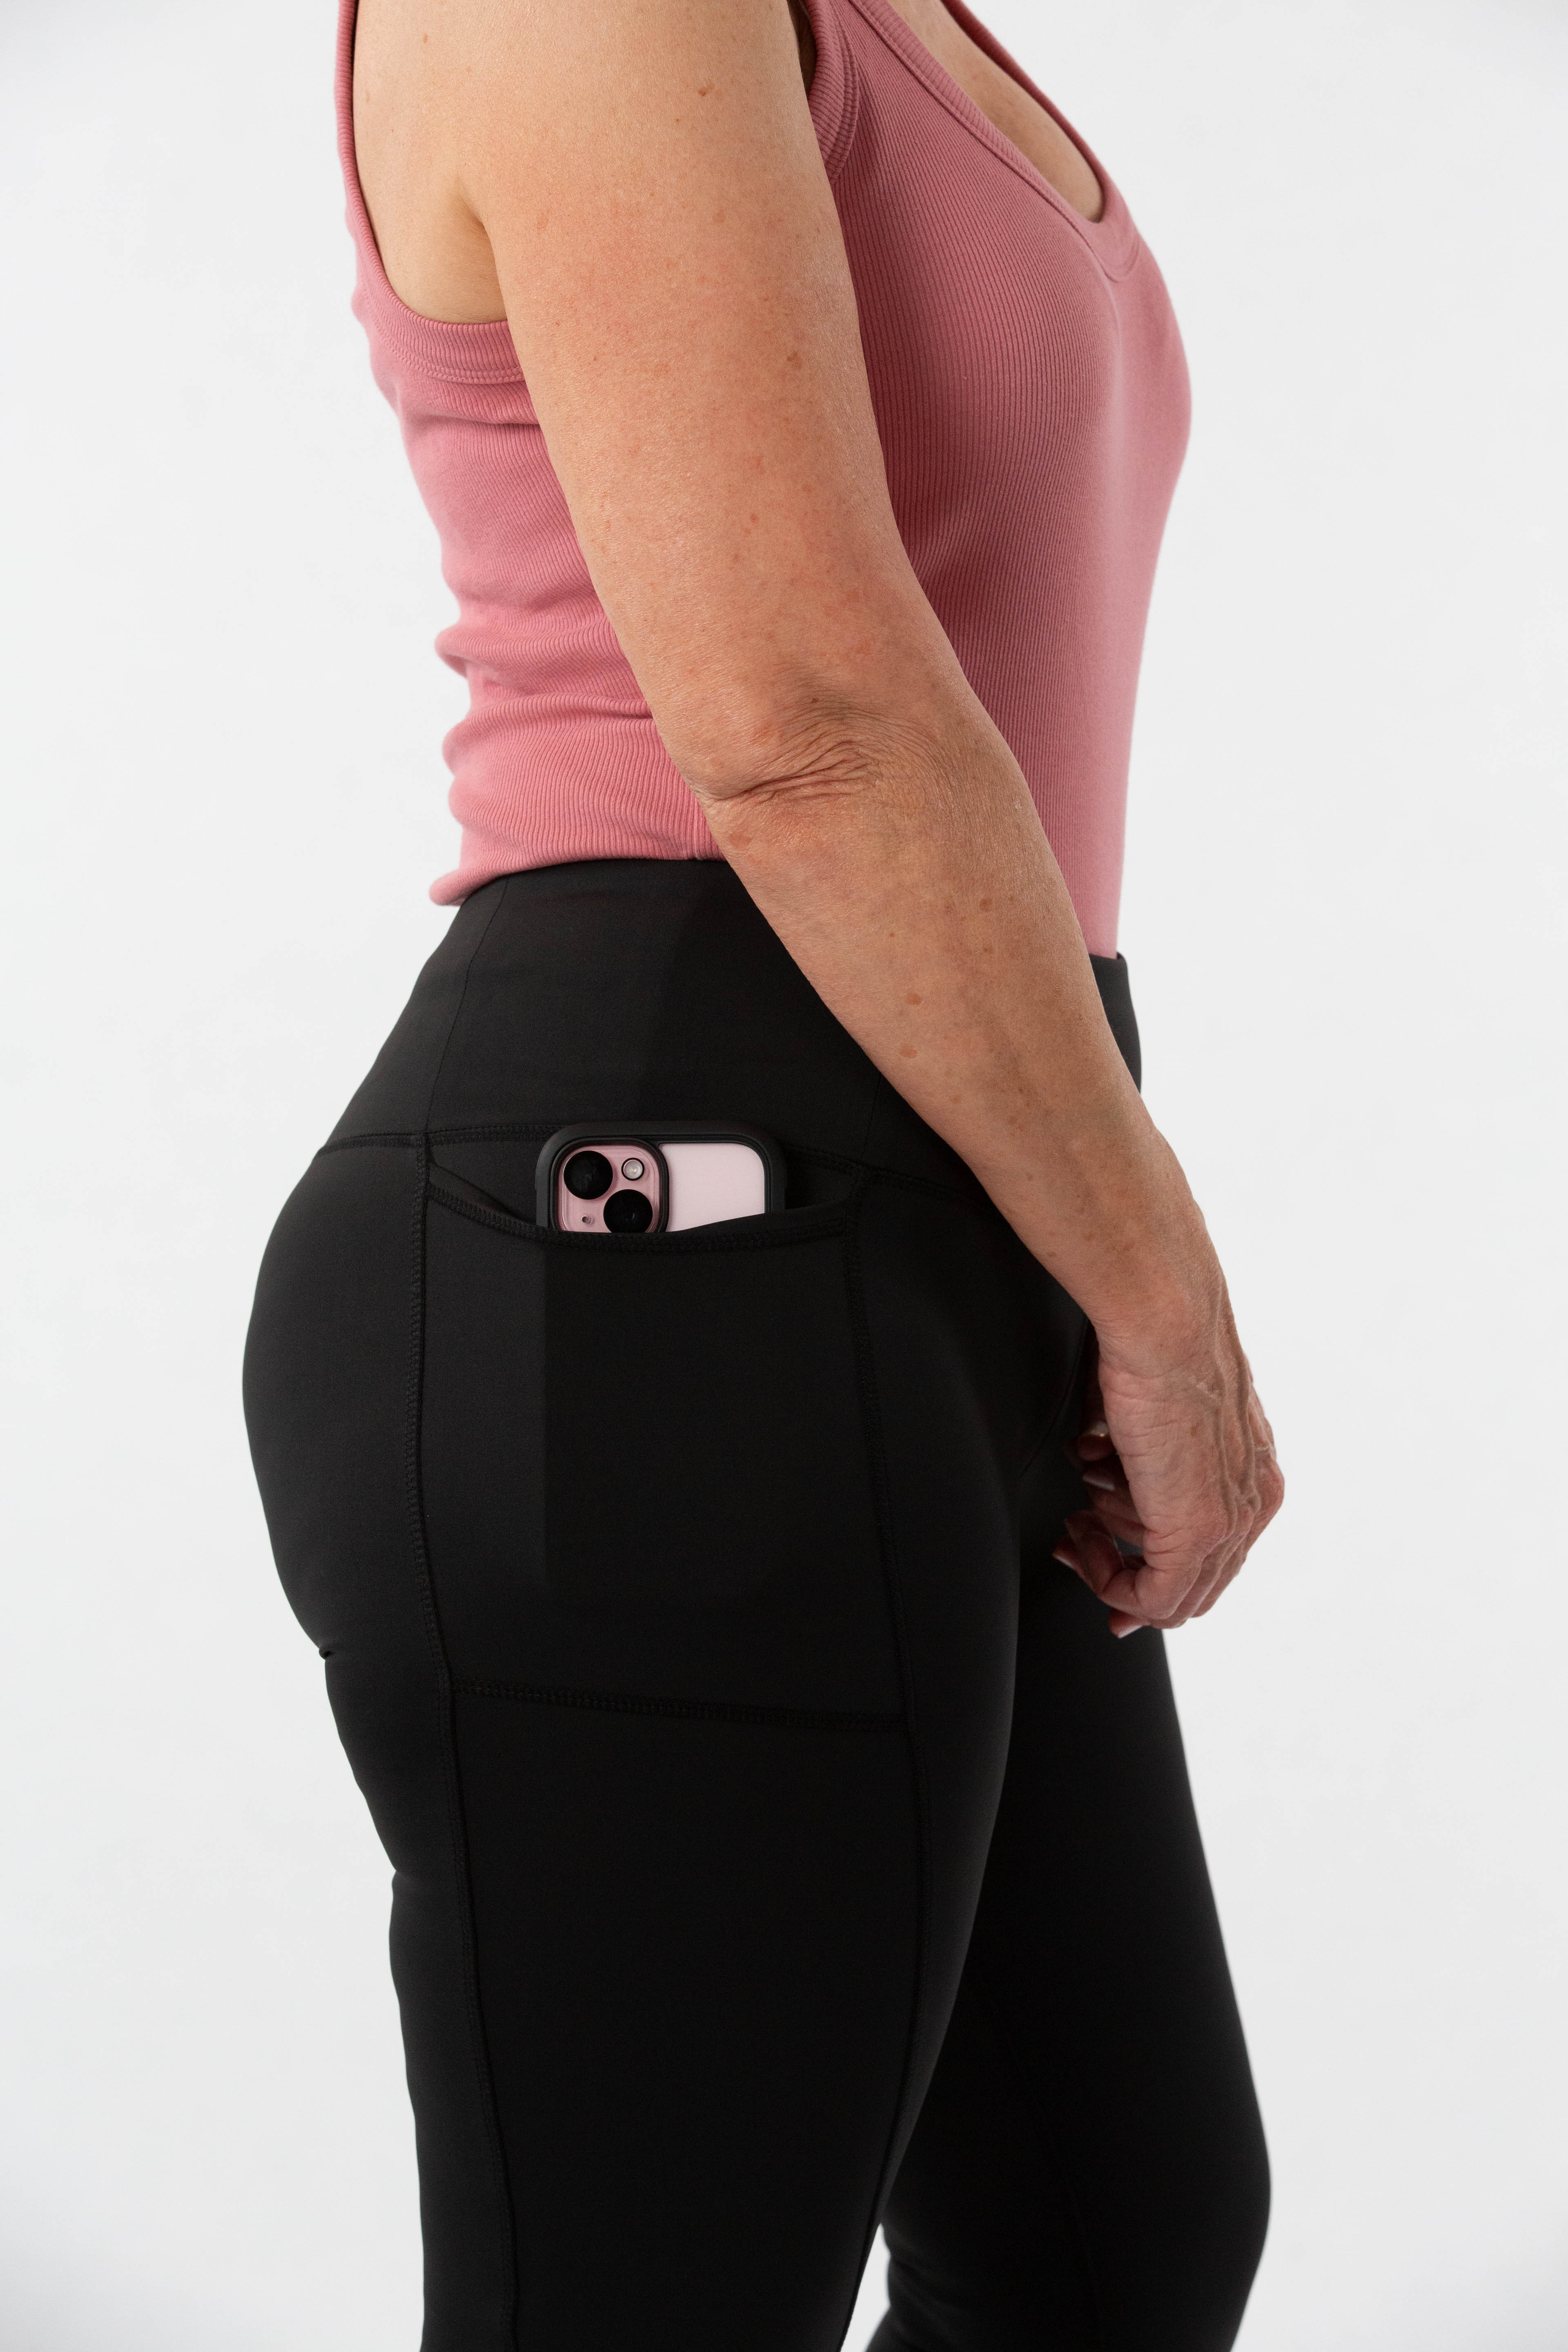 High Rise Leggings with Tummy Control